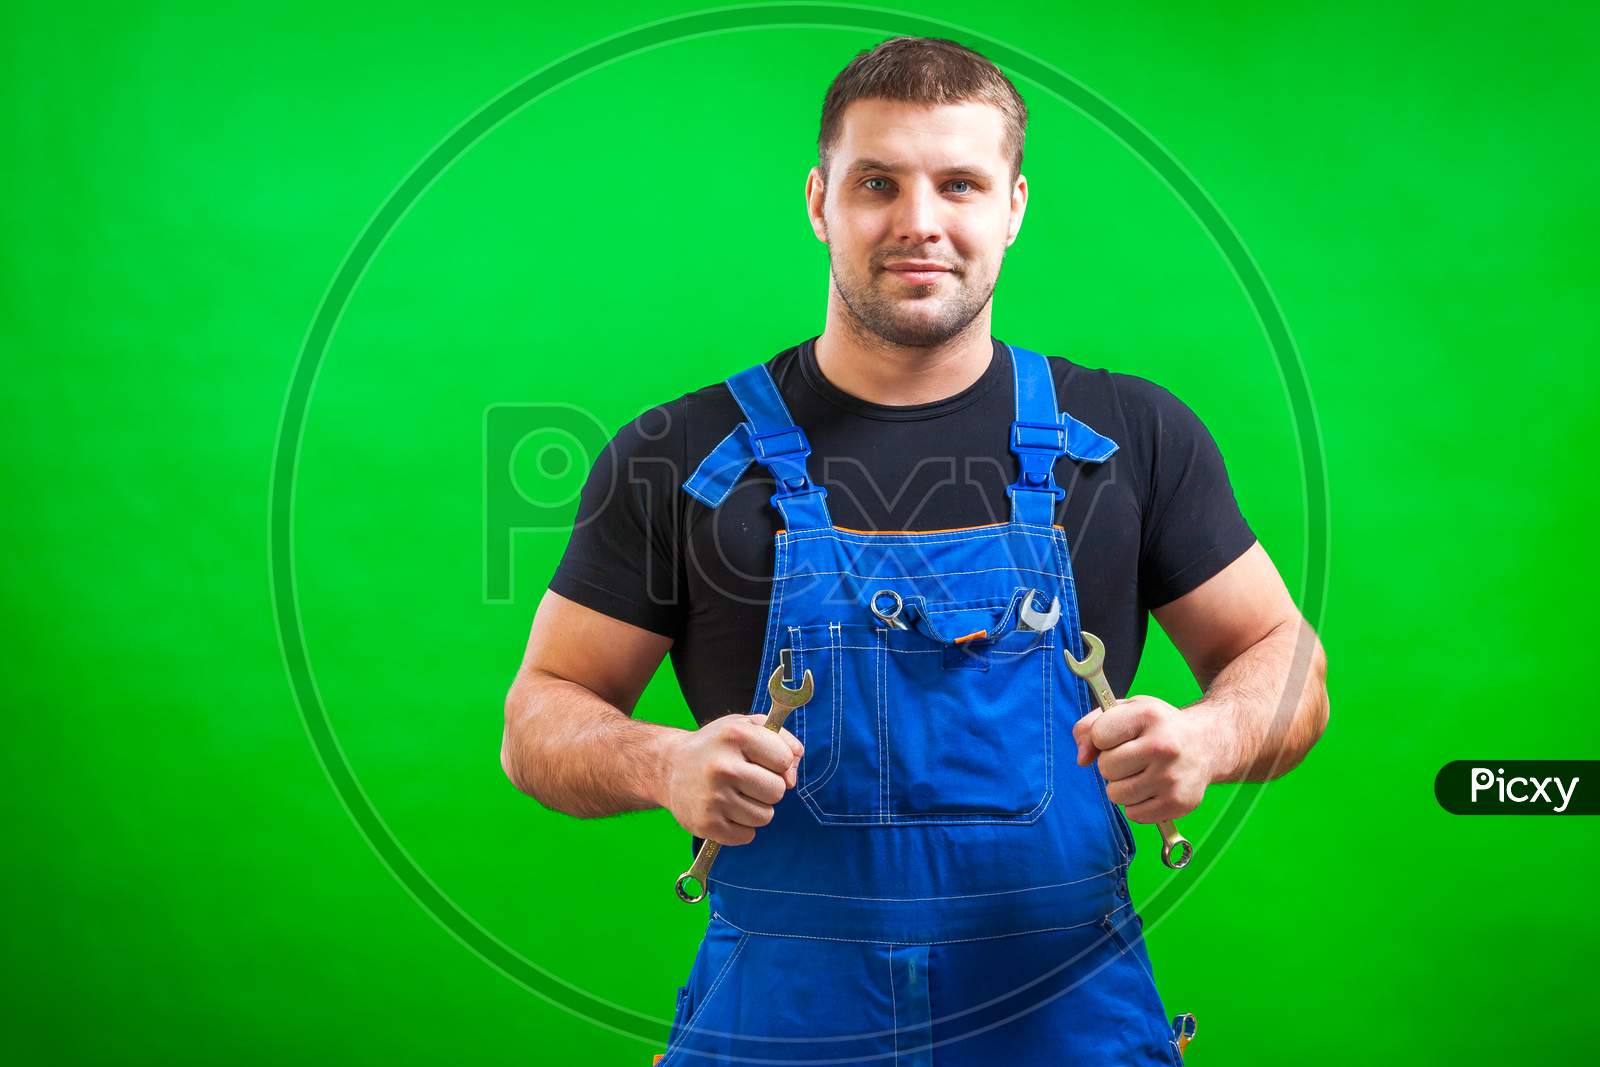 A Young Man Construction  Builder In A Black T-Shirt And Blue Construction Overall Holds In His Hands A New Tool Combination Wrench On A Green Isolated Background